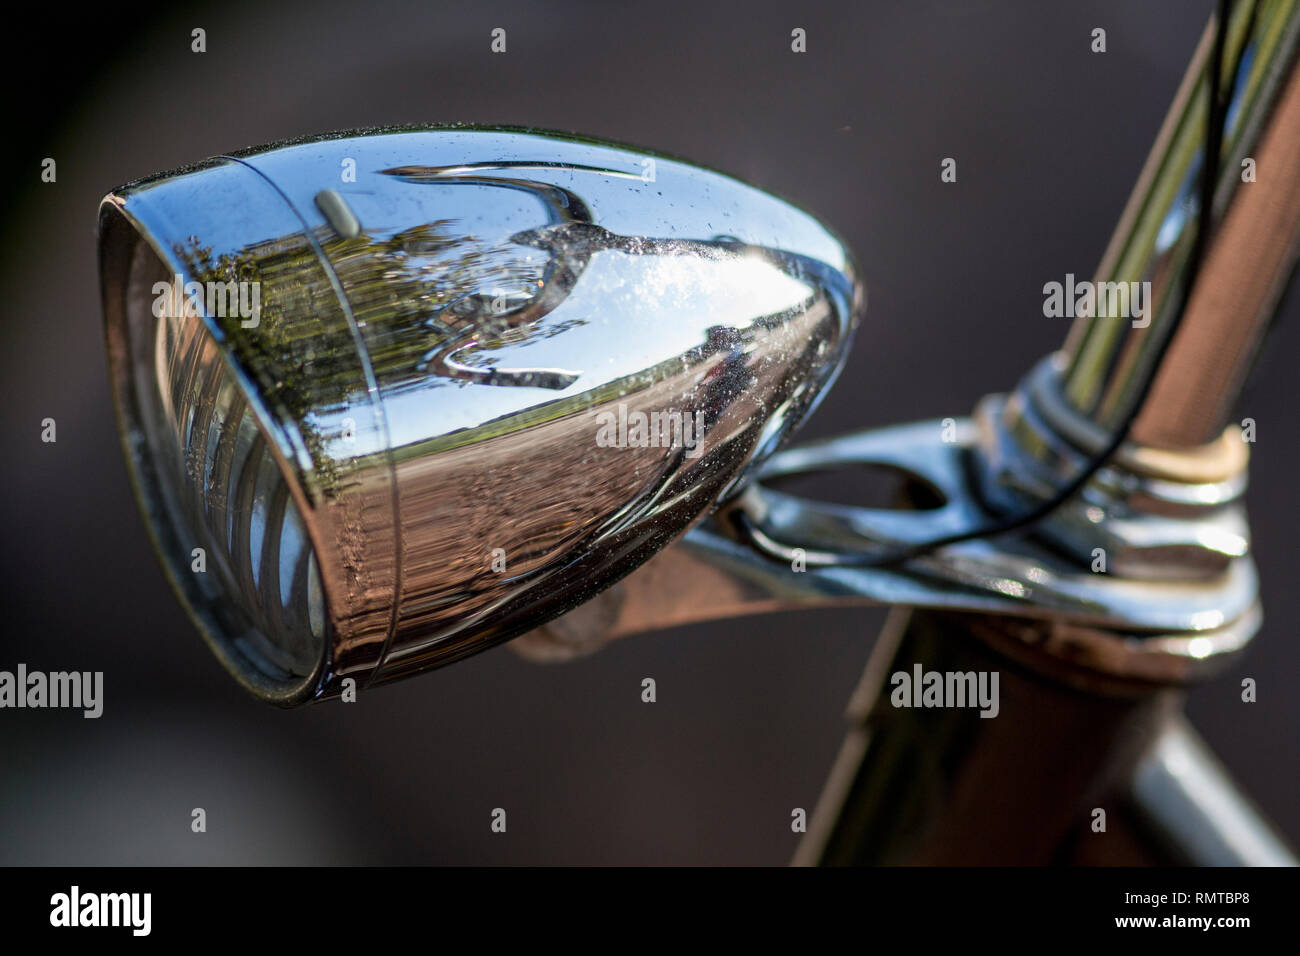 Old fashioned bicycle head lamp with reflection of steering wheel Stock Photo